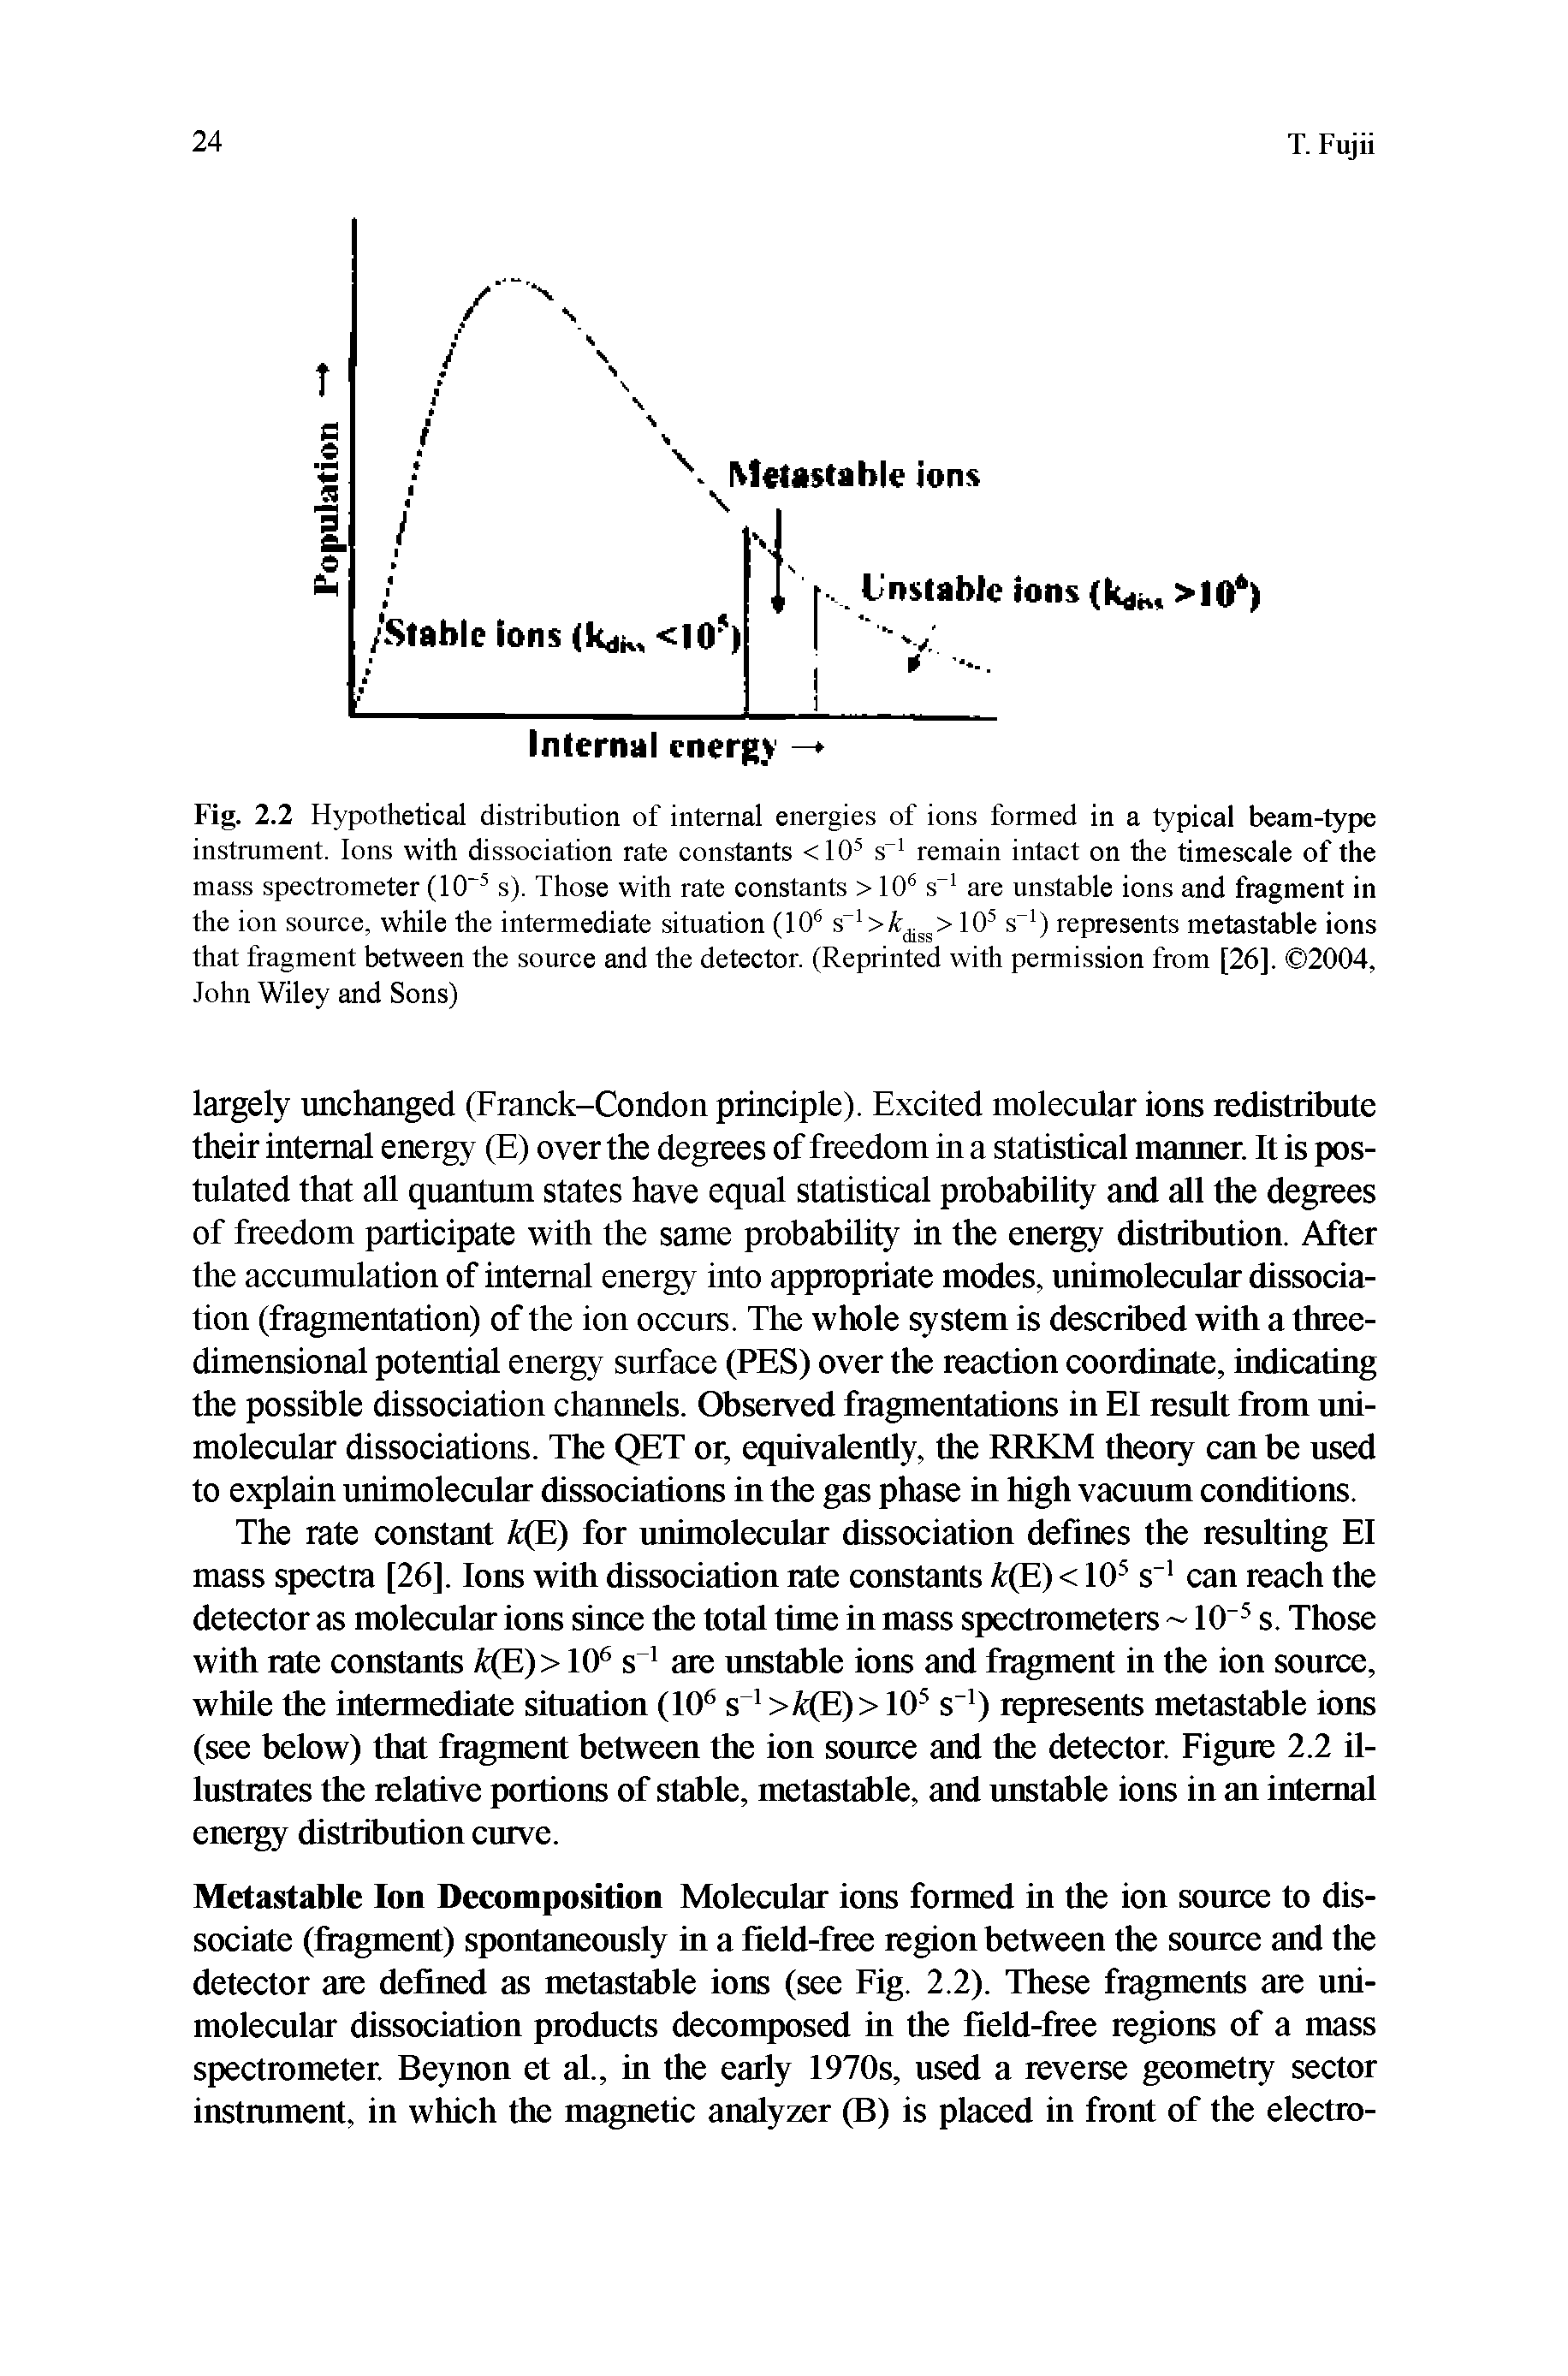 Fig. 2.2 Hypothetical distribution of internal energies of ions formed in a typical beam-type instrument. Ions with dissociation rate constants <10 s" remain intact on the timescale of the mass spectrometer (10 s). Those with rate constants > 10 s" are unstable ions and fragment in the ion source, while the intermediate situation (10 10 s" ) represents metastable ions...